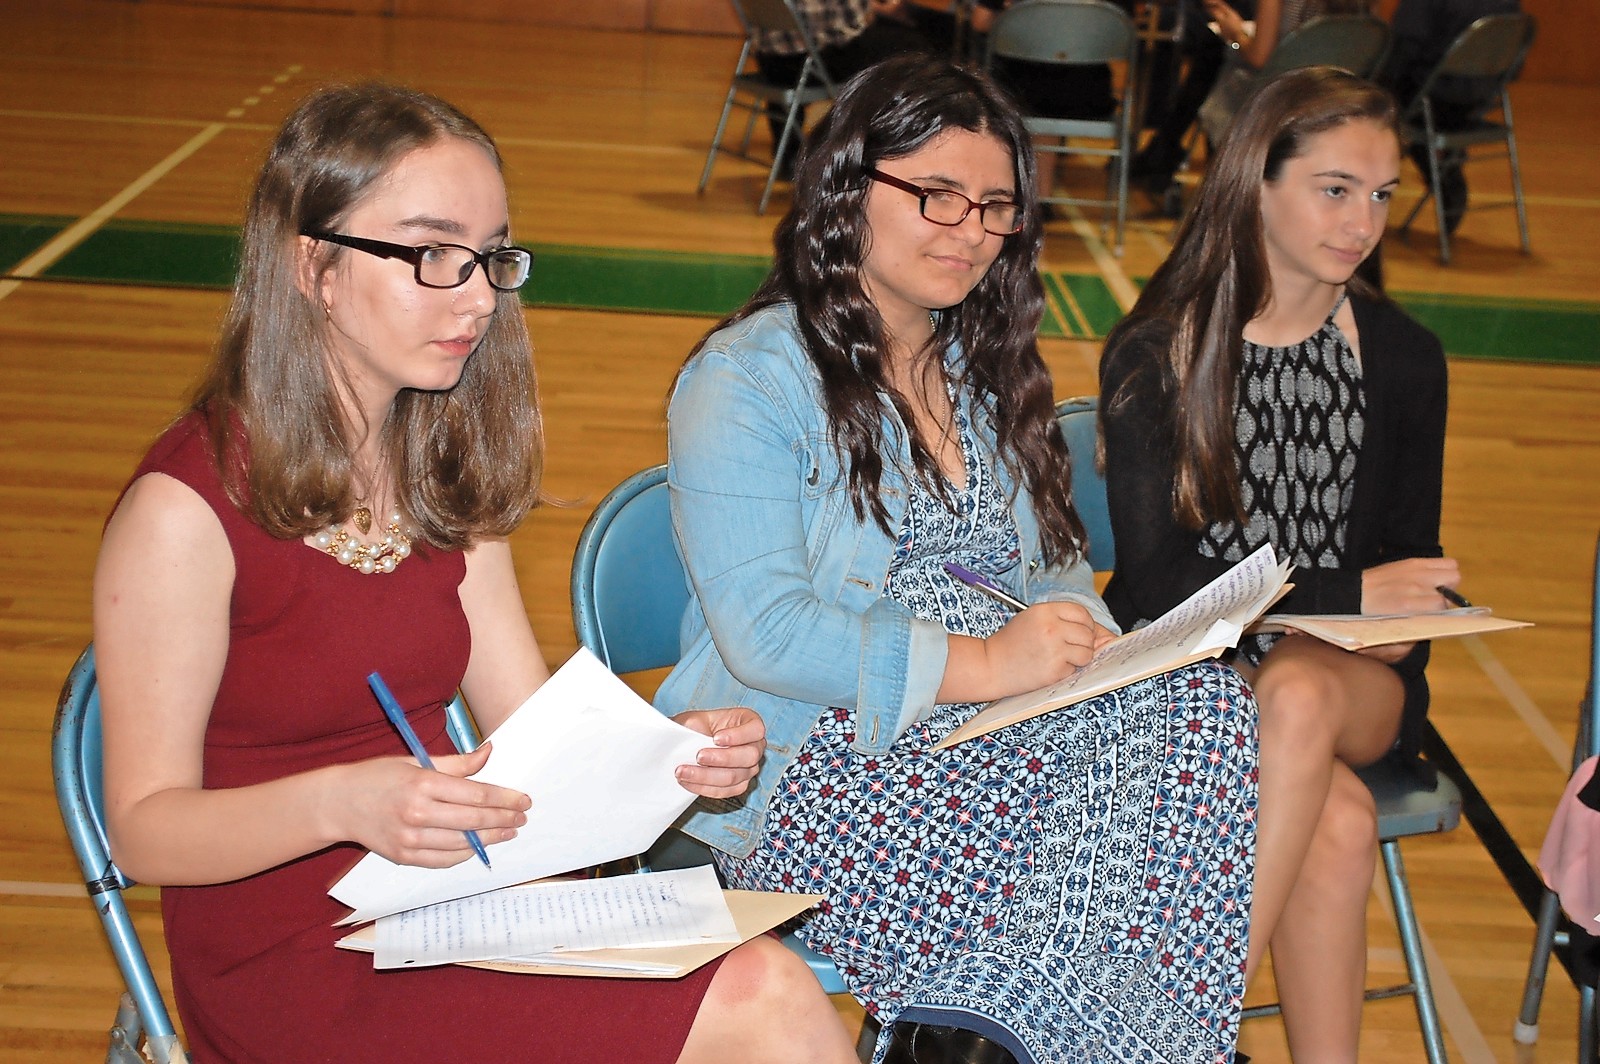 Eighth-graders, from left, Taylor Prestia, Grace Saletto and Jessica Del Signore learned about various career choices.